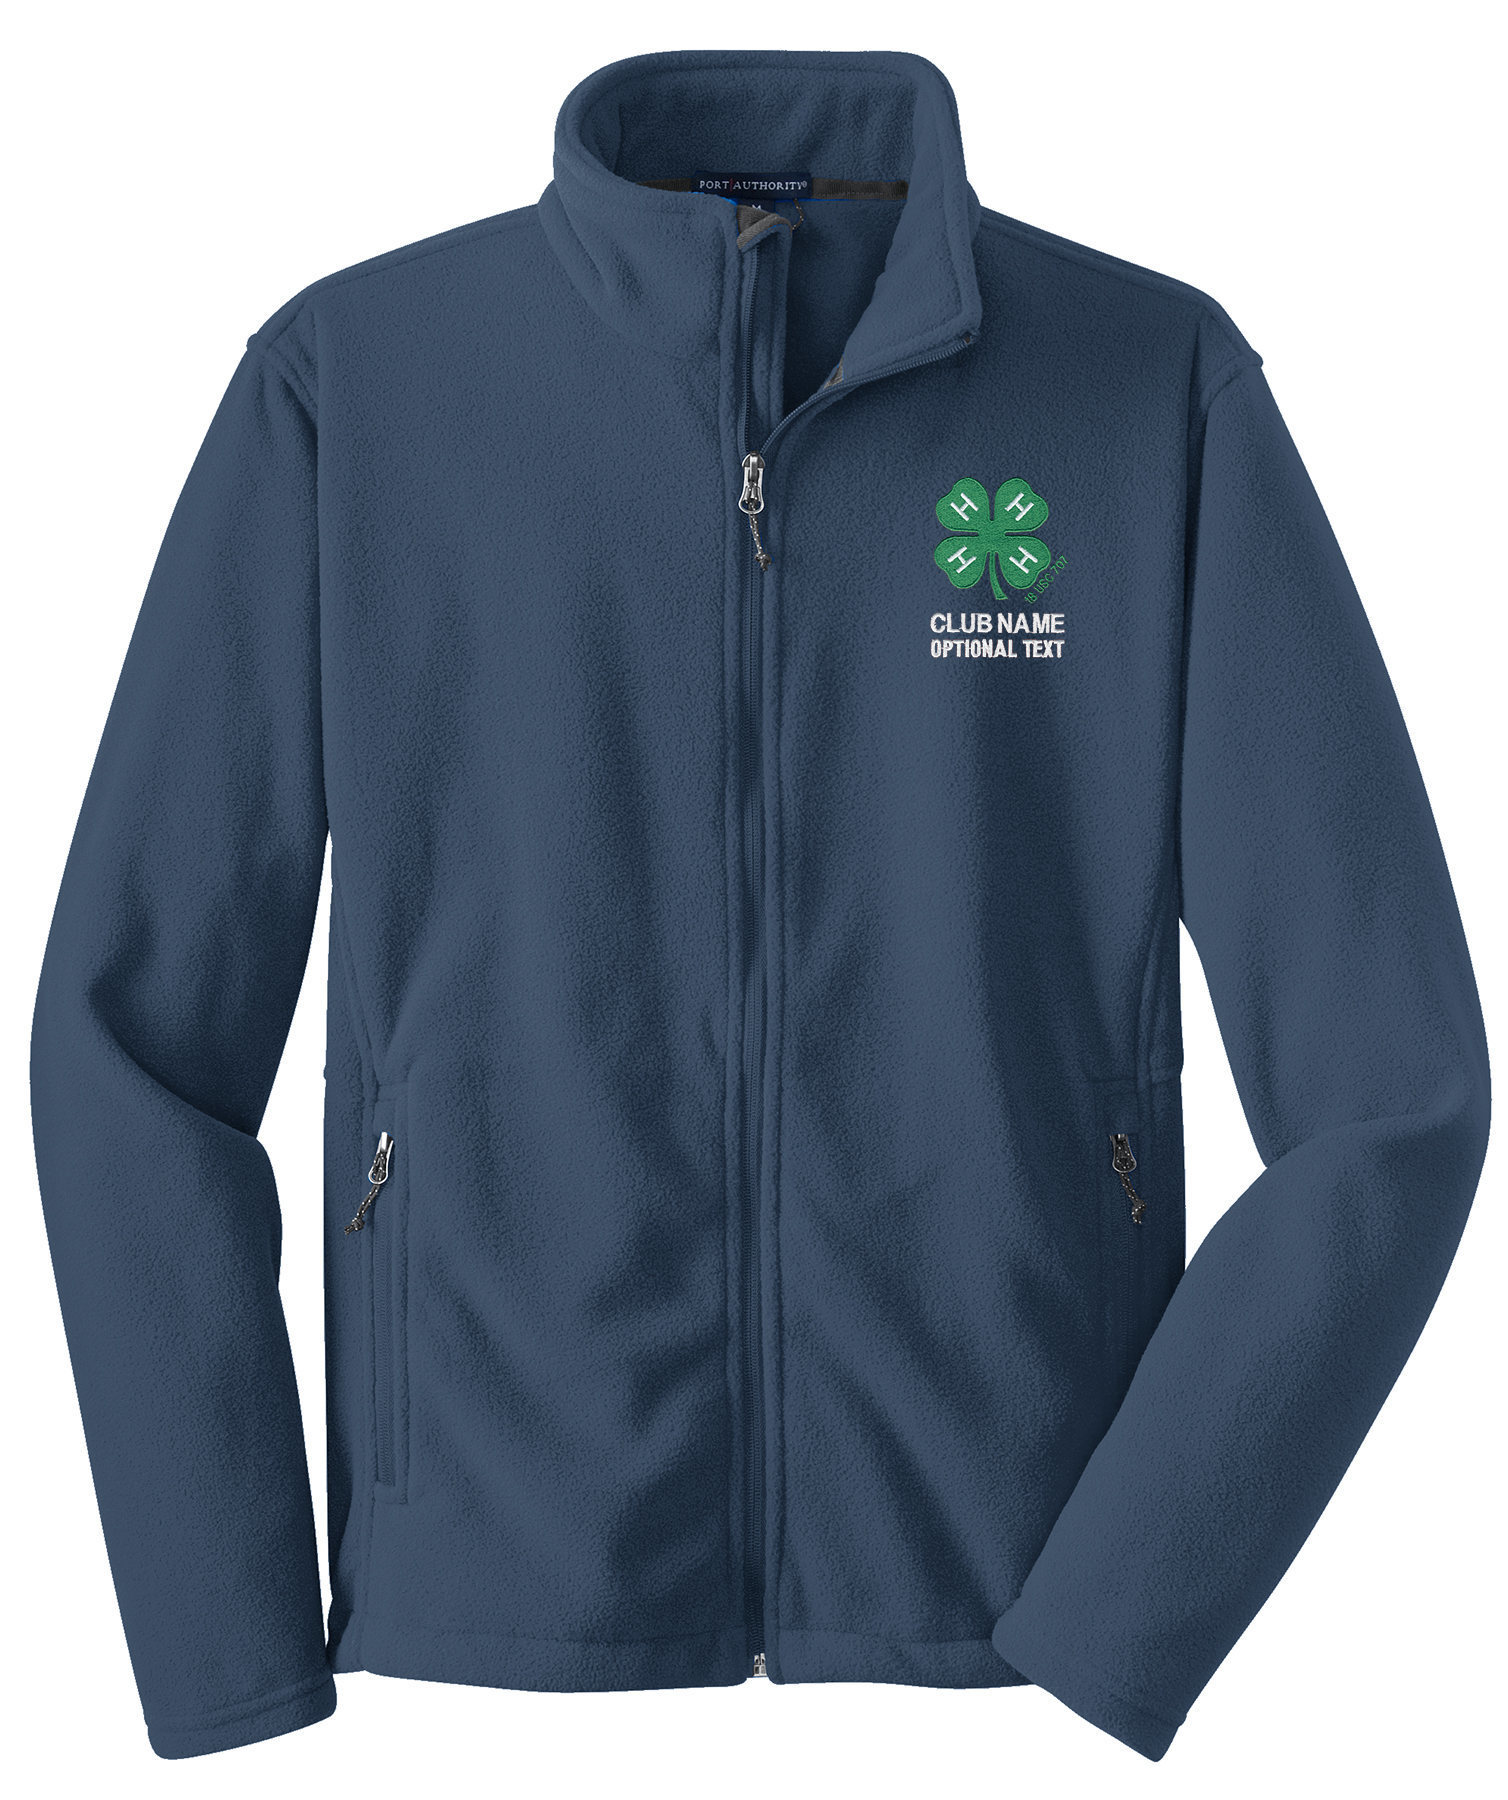 Port Authority Value Fleece Jacket with Embroidered 4-H Logo - 4-H Store